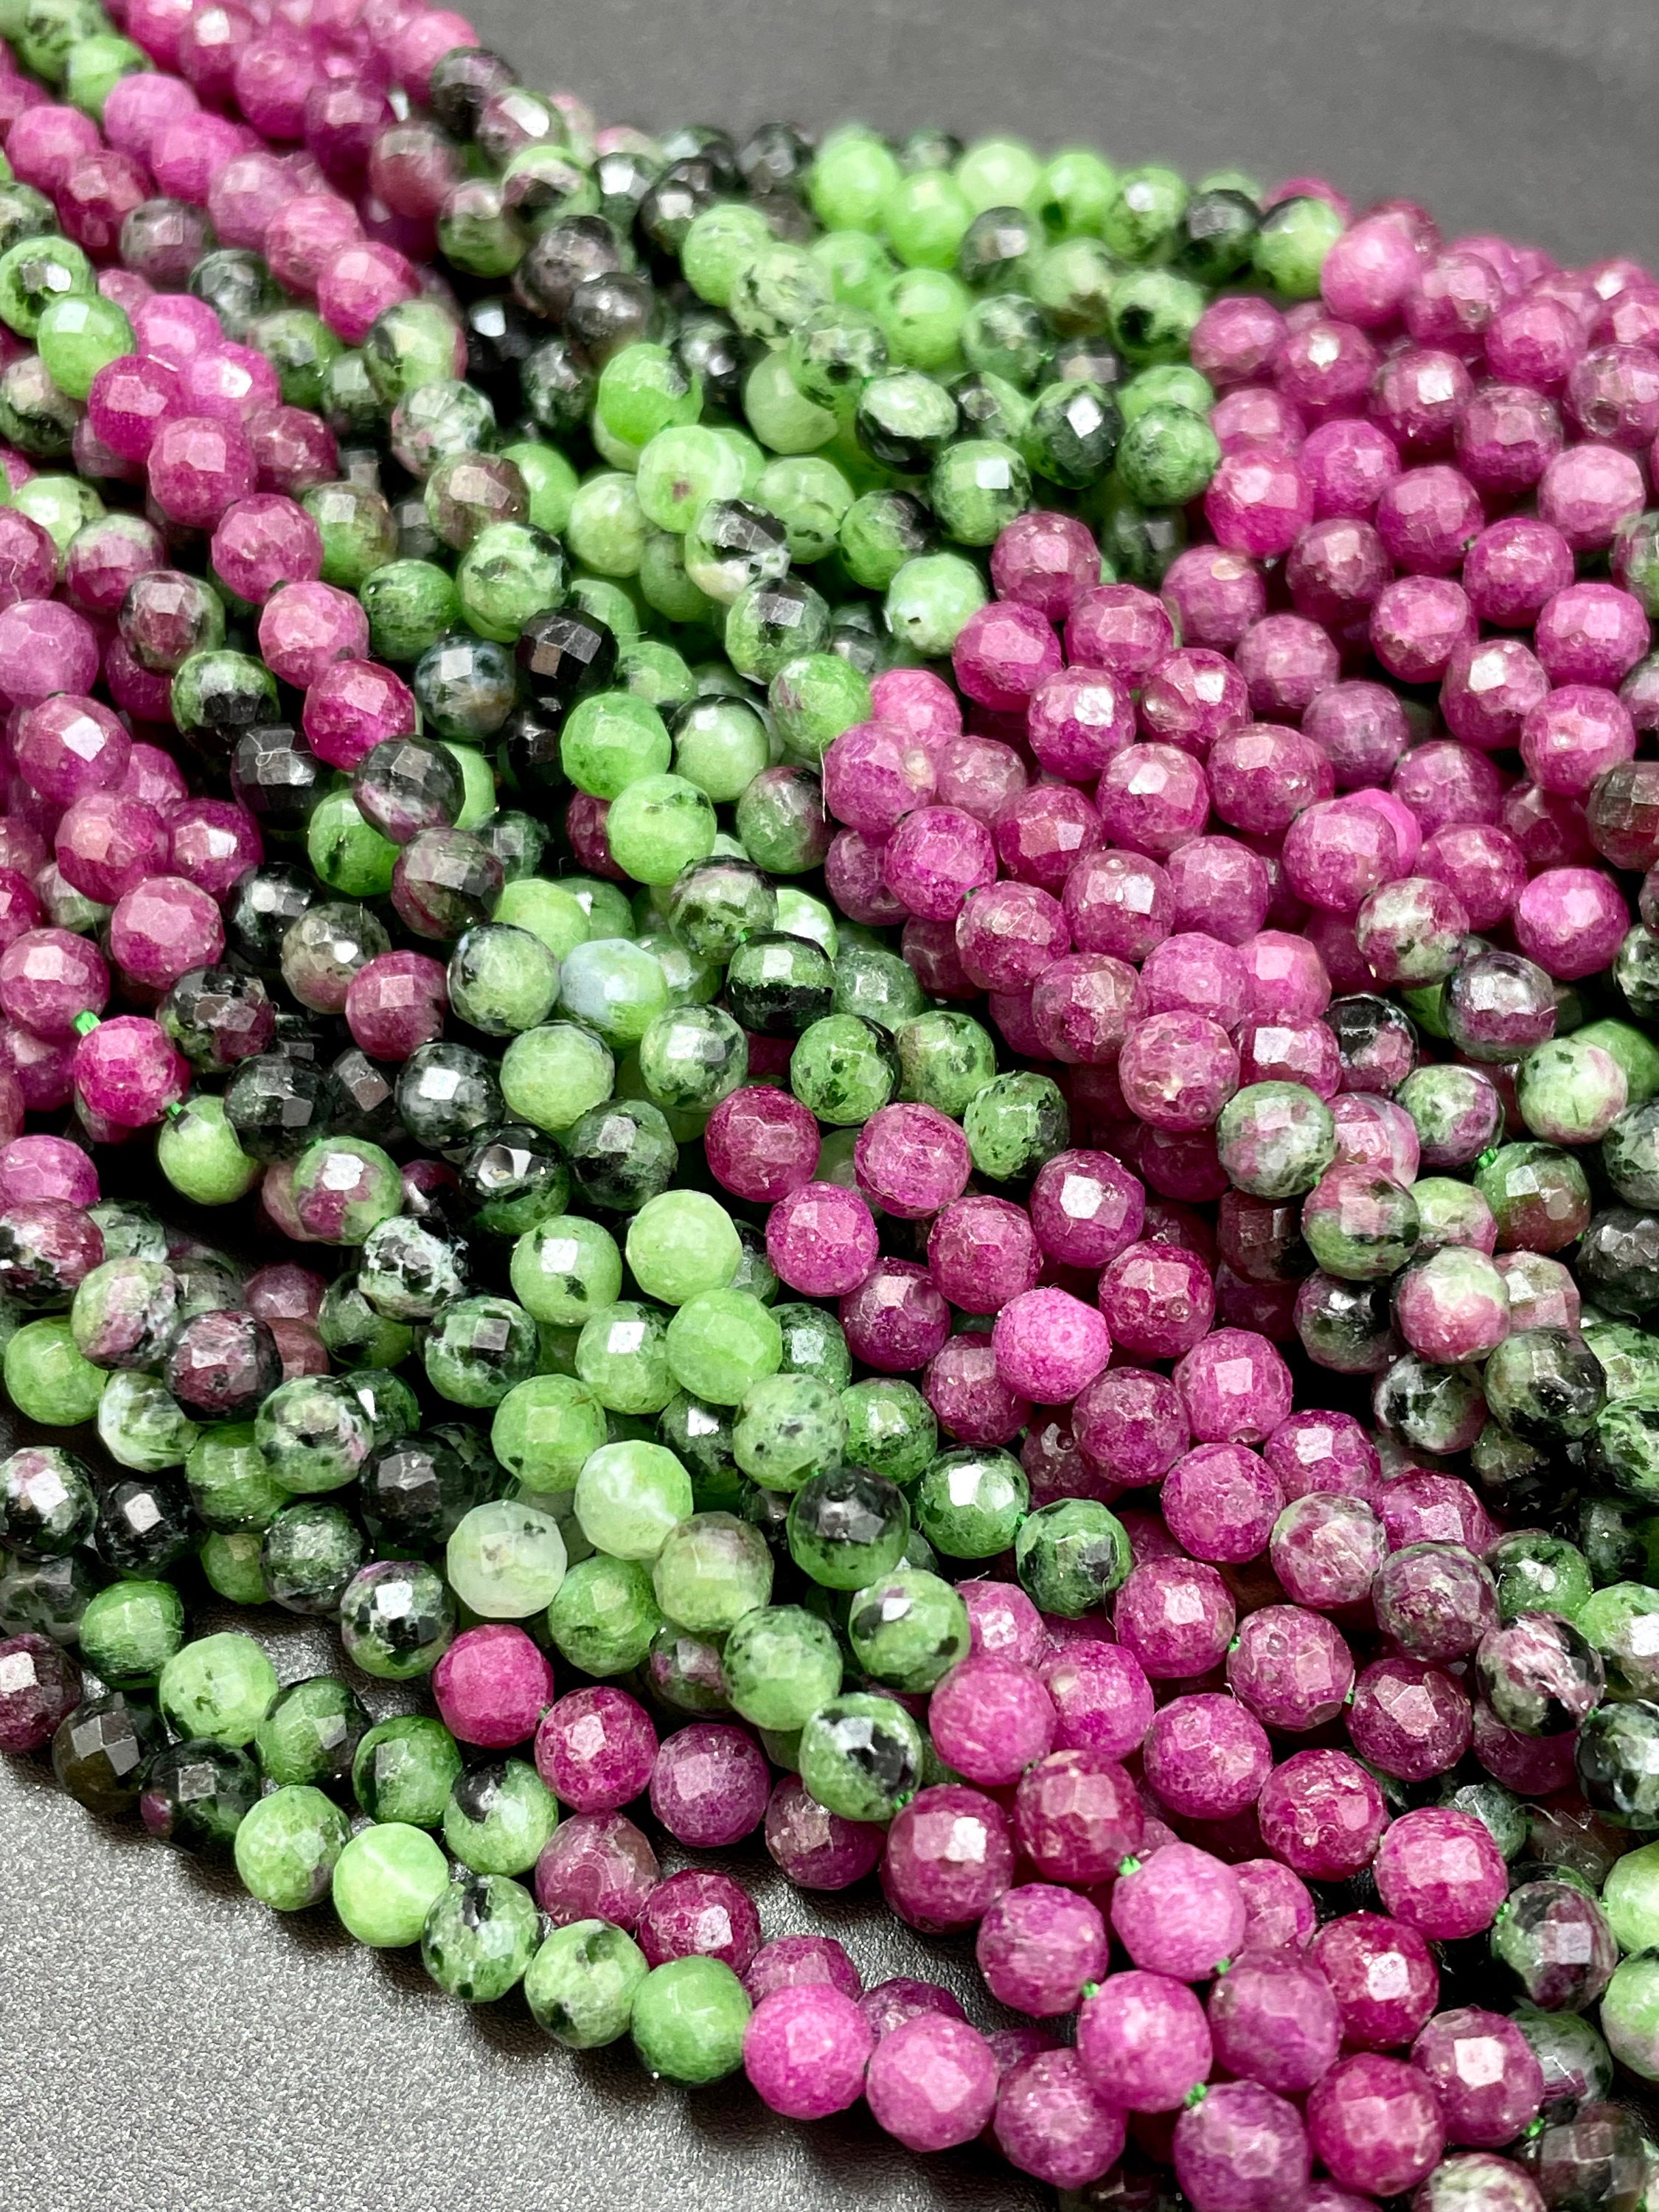 S/ Blood Stone 4mm/ 6mm Faceted Round Loose Beads 16 Strand Natural Green/red  Beads for Jewelry Making 